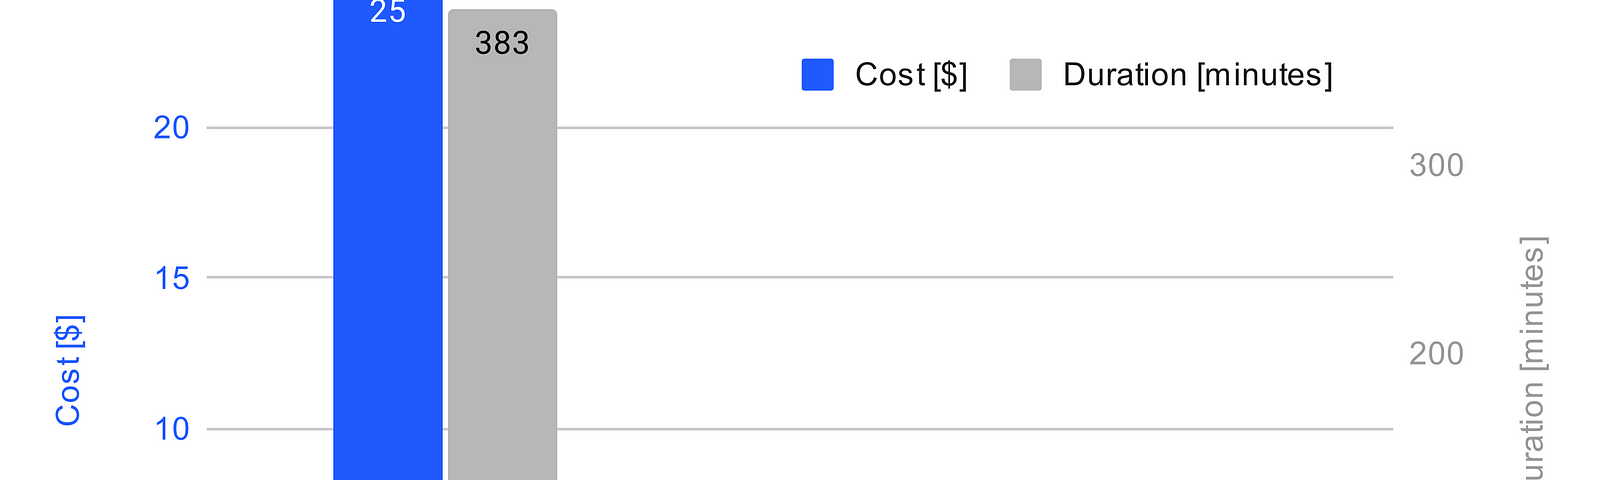 Comparing cost and duration between running the same workflow locally on a laptop (data egress costs), running on AWS, and running with cost optimizations on AWS.